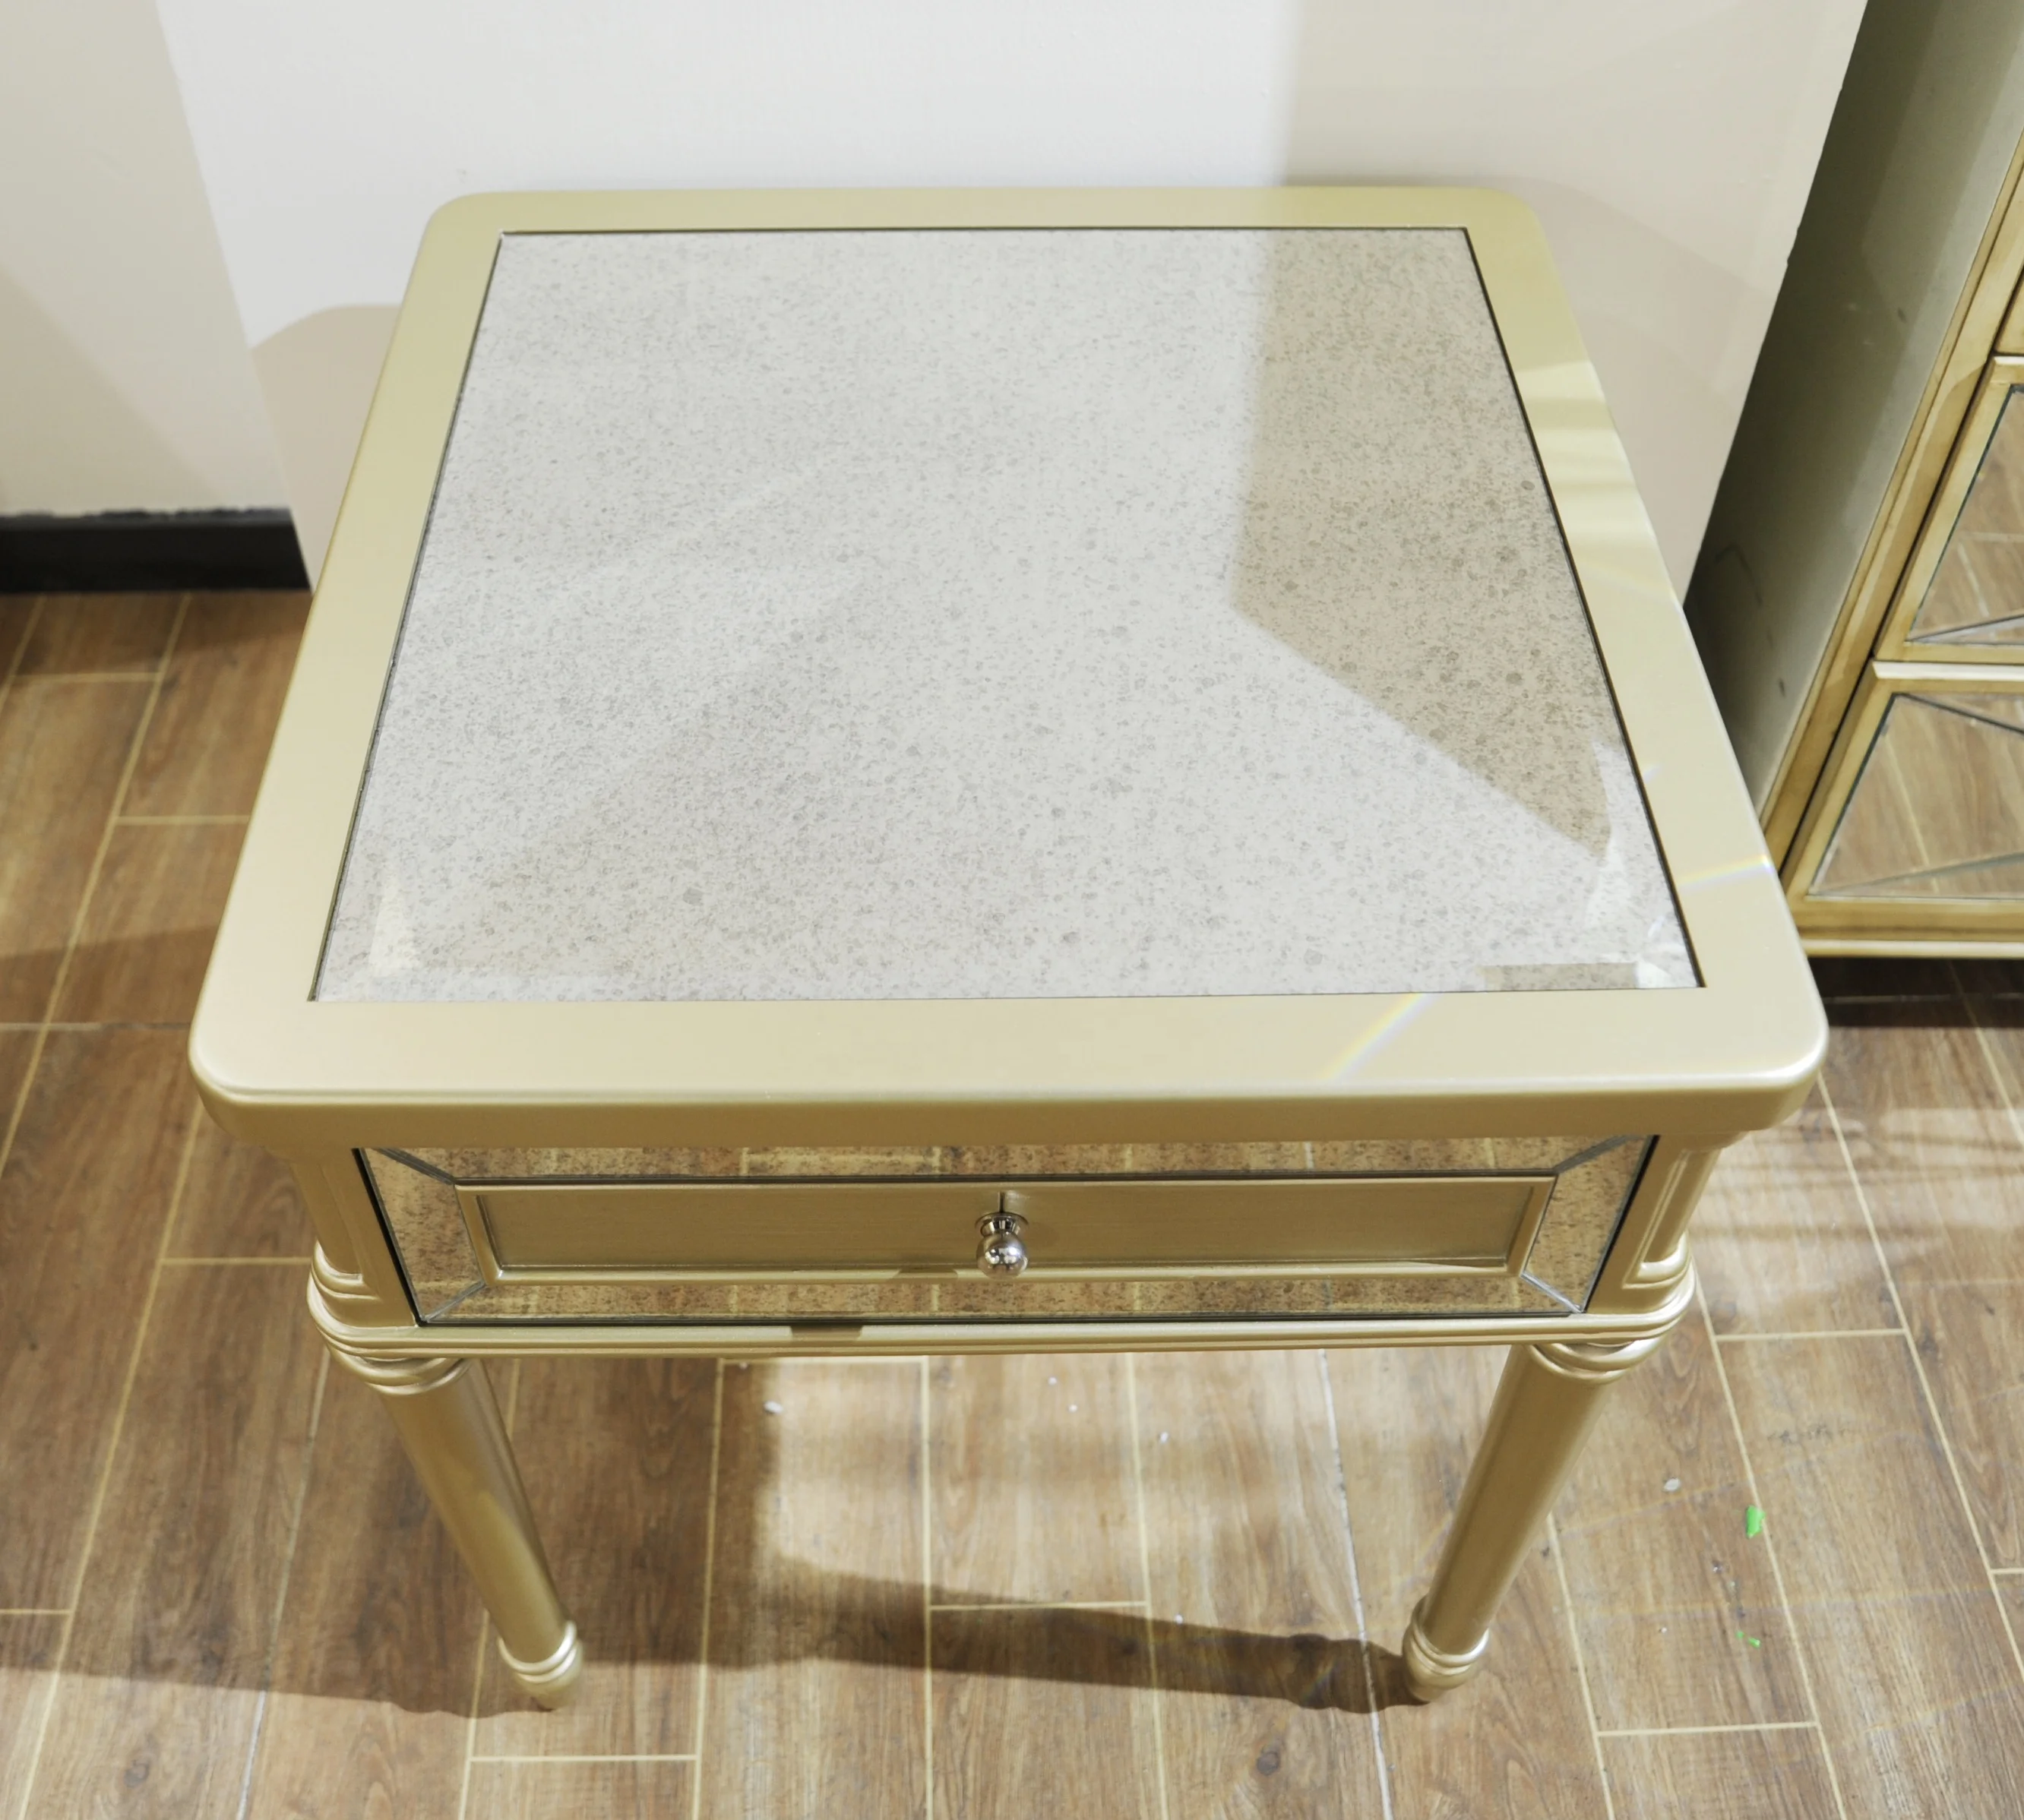 Modern Fashion Hot Selling Handmade Gold Painted Antique Mirror End table with 1 drawer Nightstand Side table